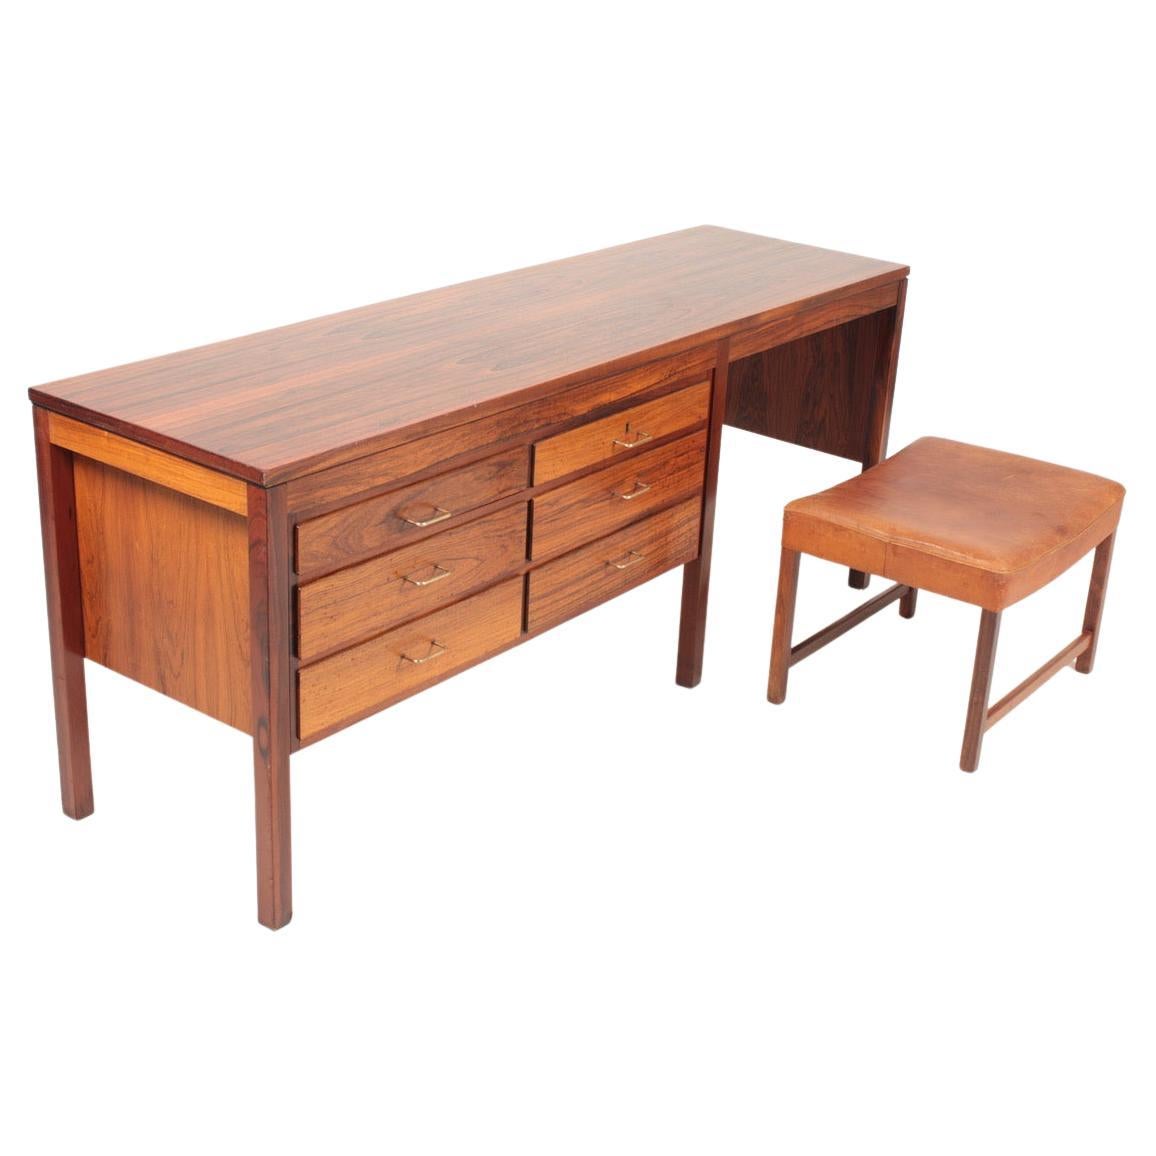 Desk and stool in rosewood designed and made in Denmark in the 1960s. Great condition.